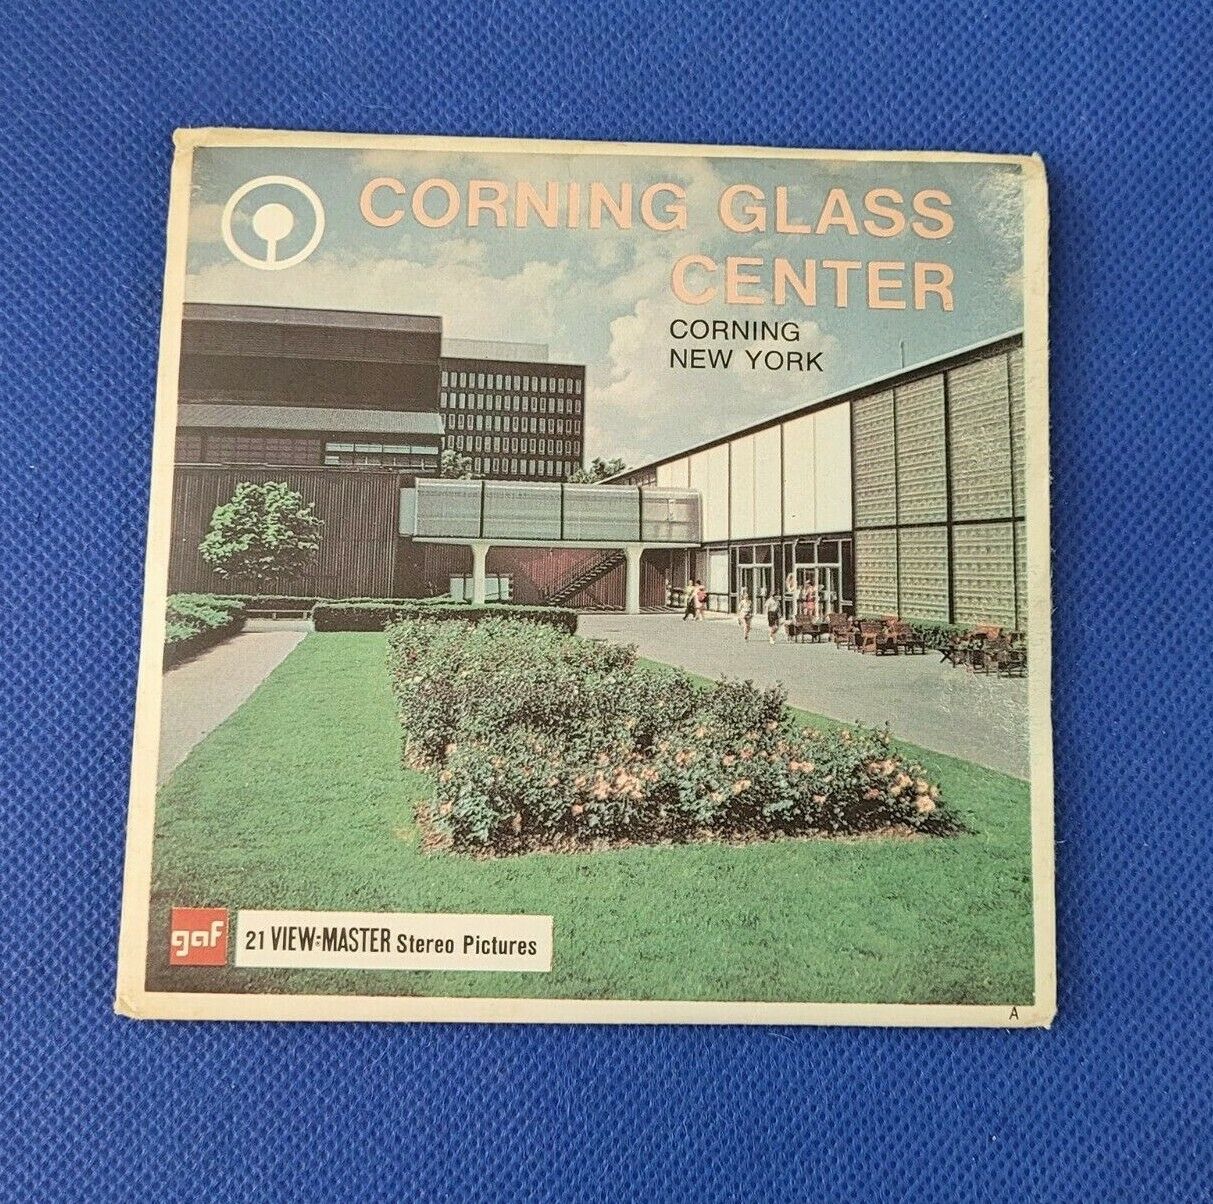 Vintage Gaf A666 Corning Glass Center Corning New York view-master Reels Packet